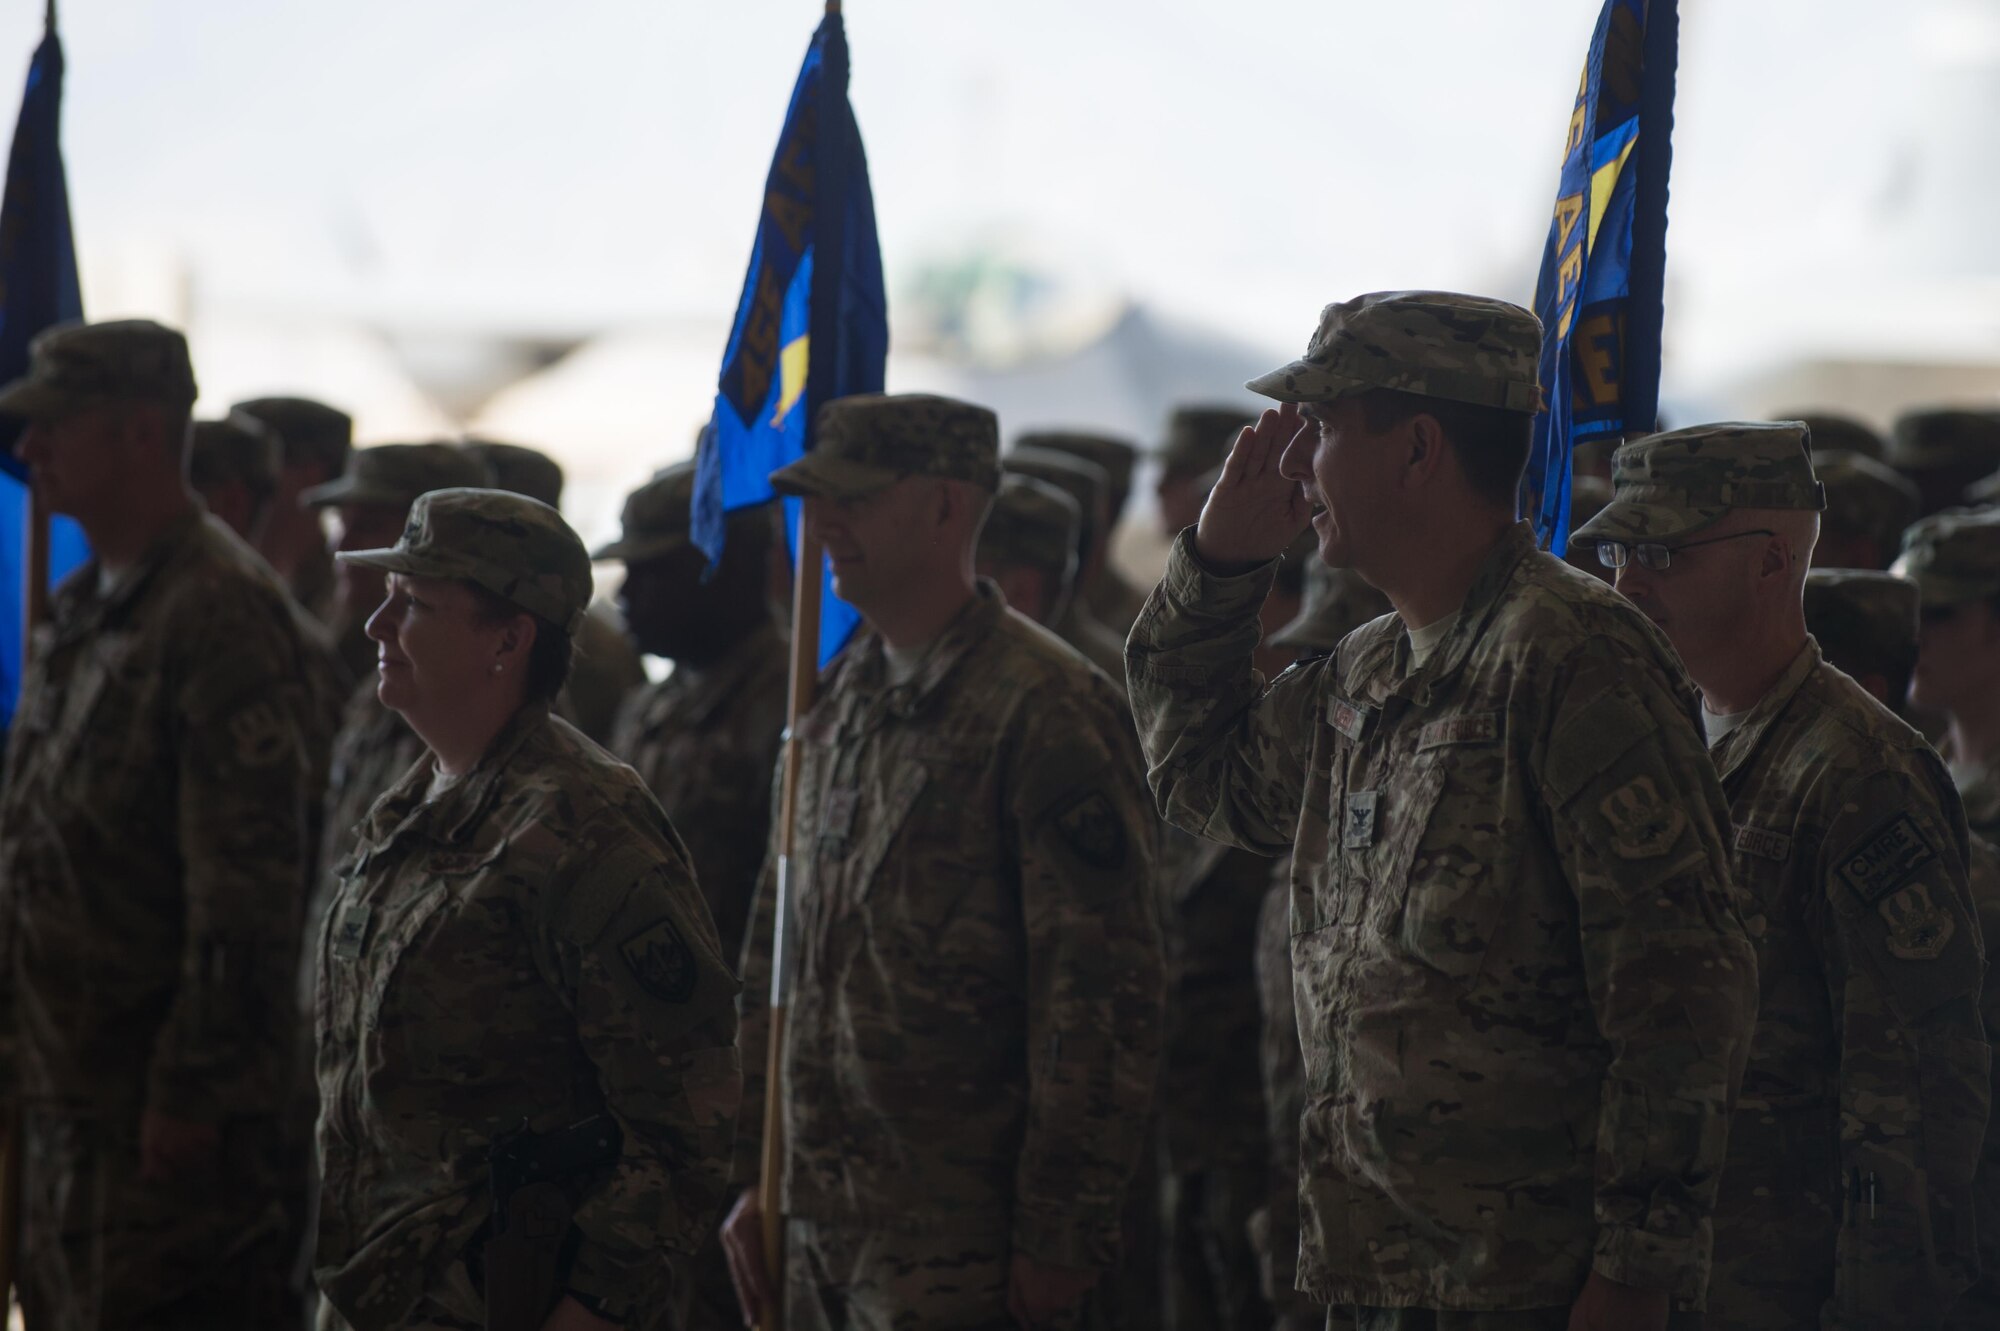 U.S. Air Force Col. Rhude Cherry, 451st Air Expeditionary Group commander, salutes during the 455th Air Expeditionary Wing change of command ceremony at Bagram Airfield, Afghanistan, July 1, 2015. During the ceremony Kelly relinquished command of the 455th AEW to Brig. Gen. Dave Julazadeh.  (U.S. Air Force photo by Tech. Sgt. Joseph Swafford/Released)